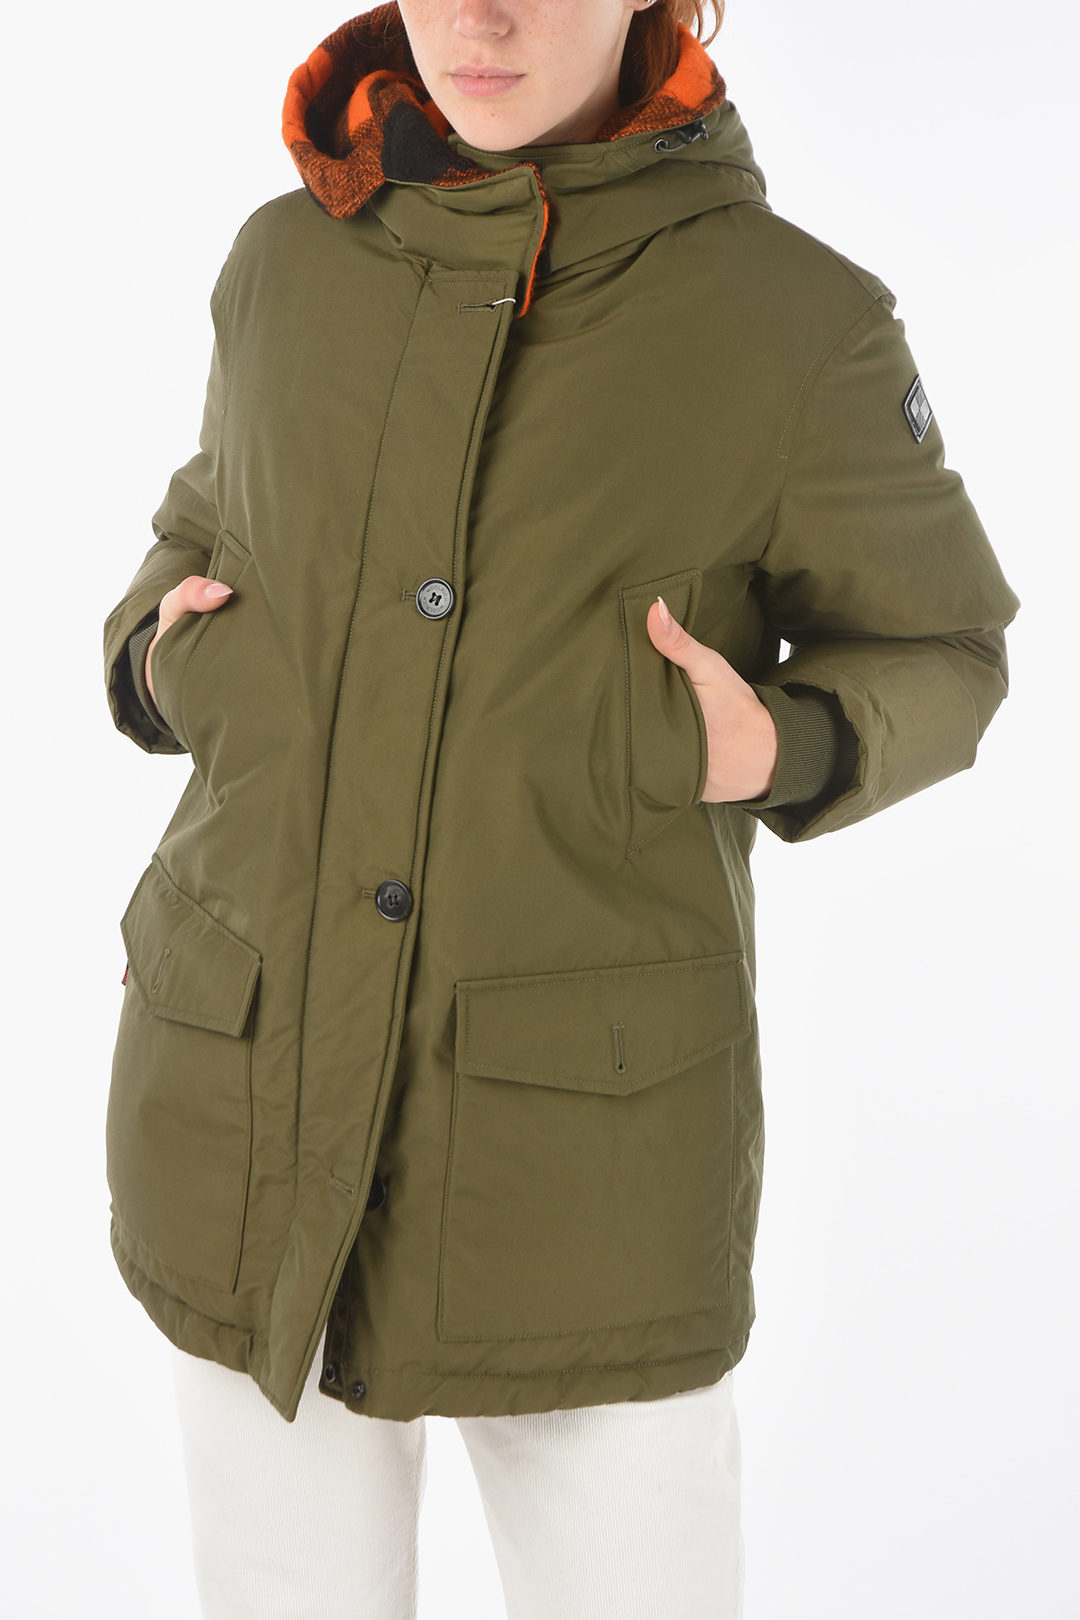 rand meer argument Woolrich contrasting details reversible down jacket women - Glamood Outlet